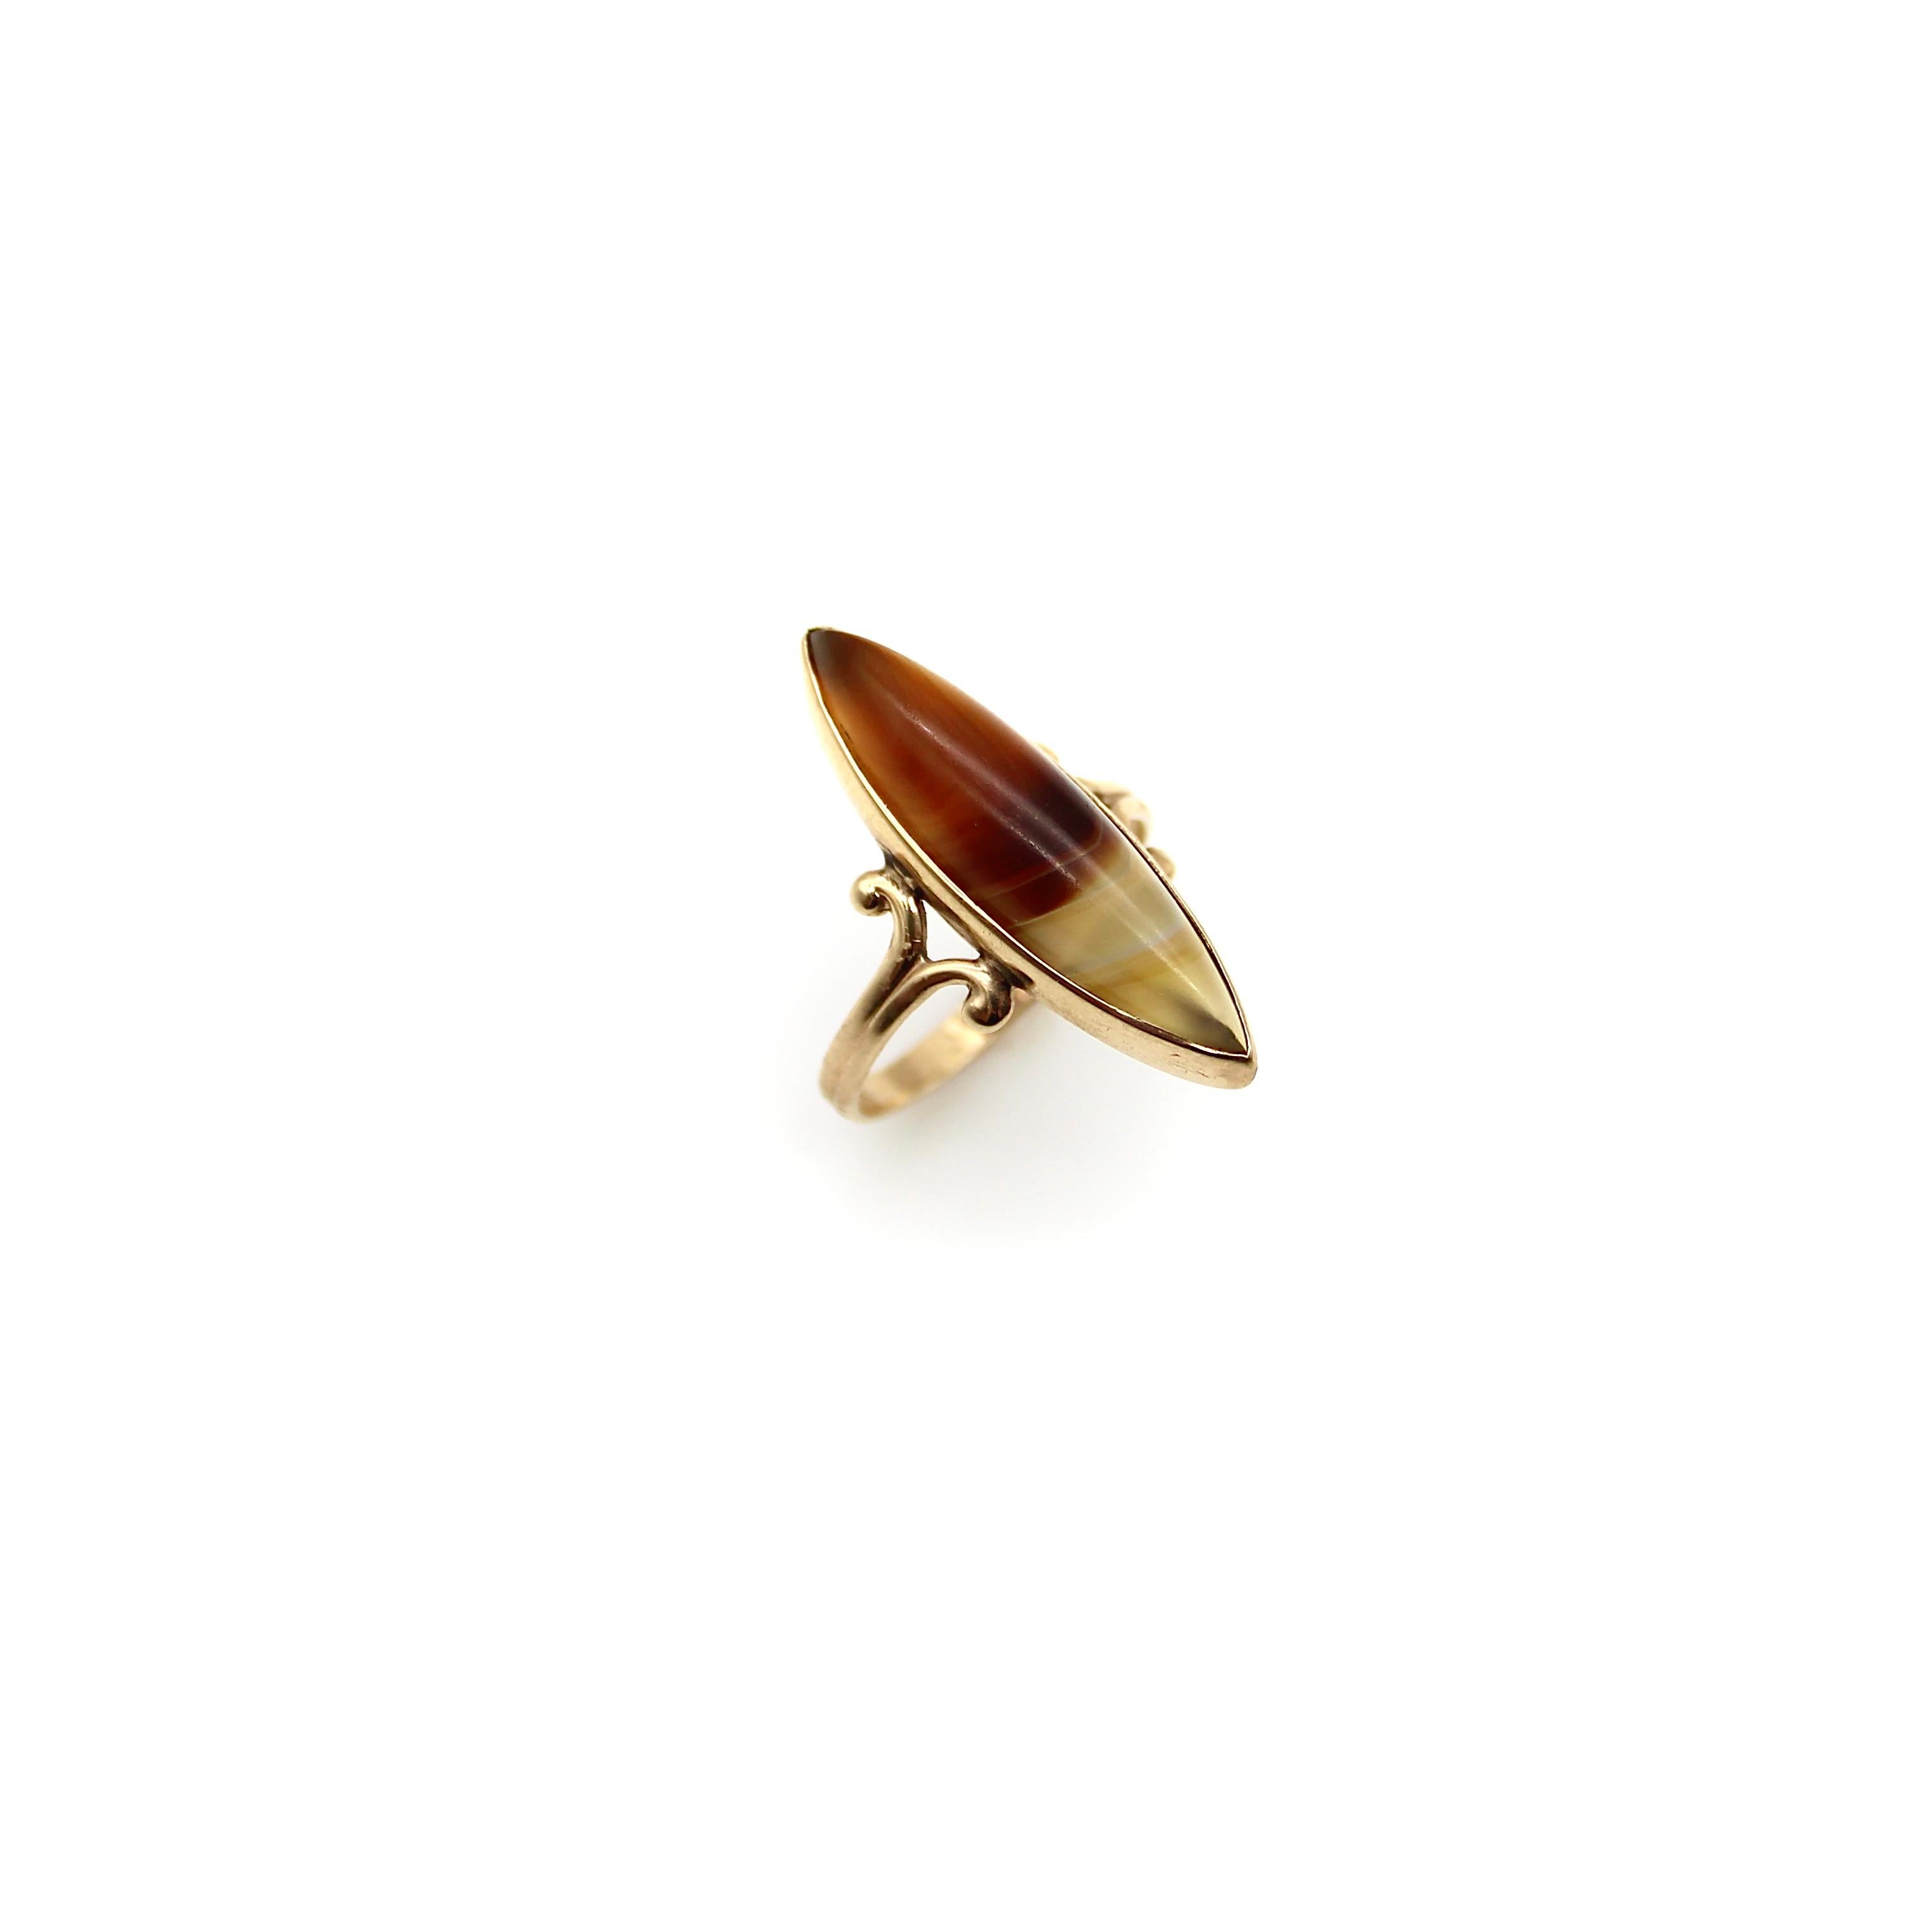 A skinny marquise-shaped banded agate from the Great Northwest decorates the top of this elegant turn-of-the-century ring. The translucent banded agate creates a sliver or boat-like form with its narrow dimensions. The agate is soft to the touch and